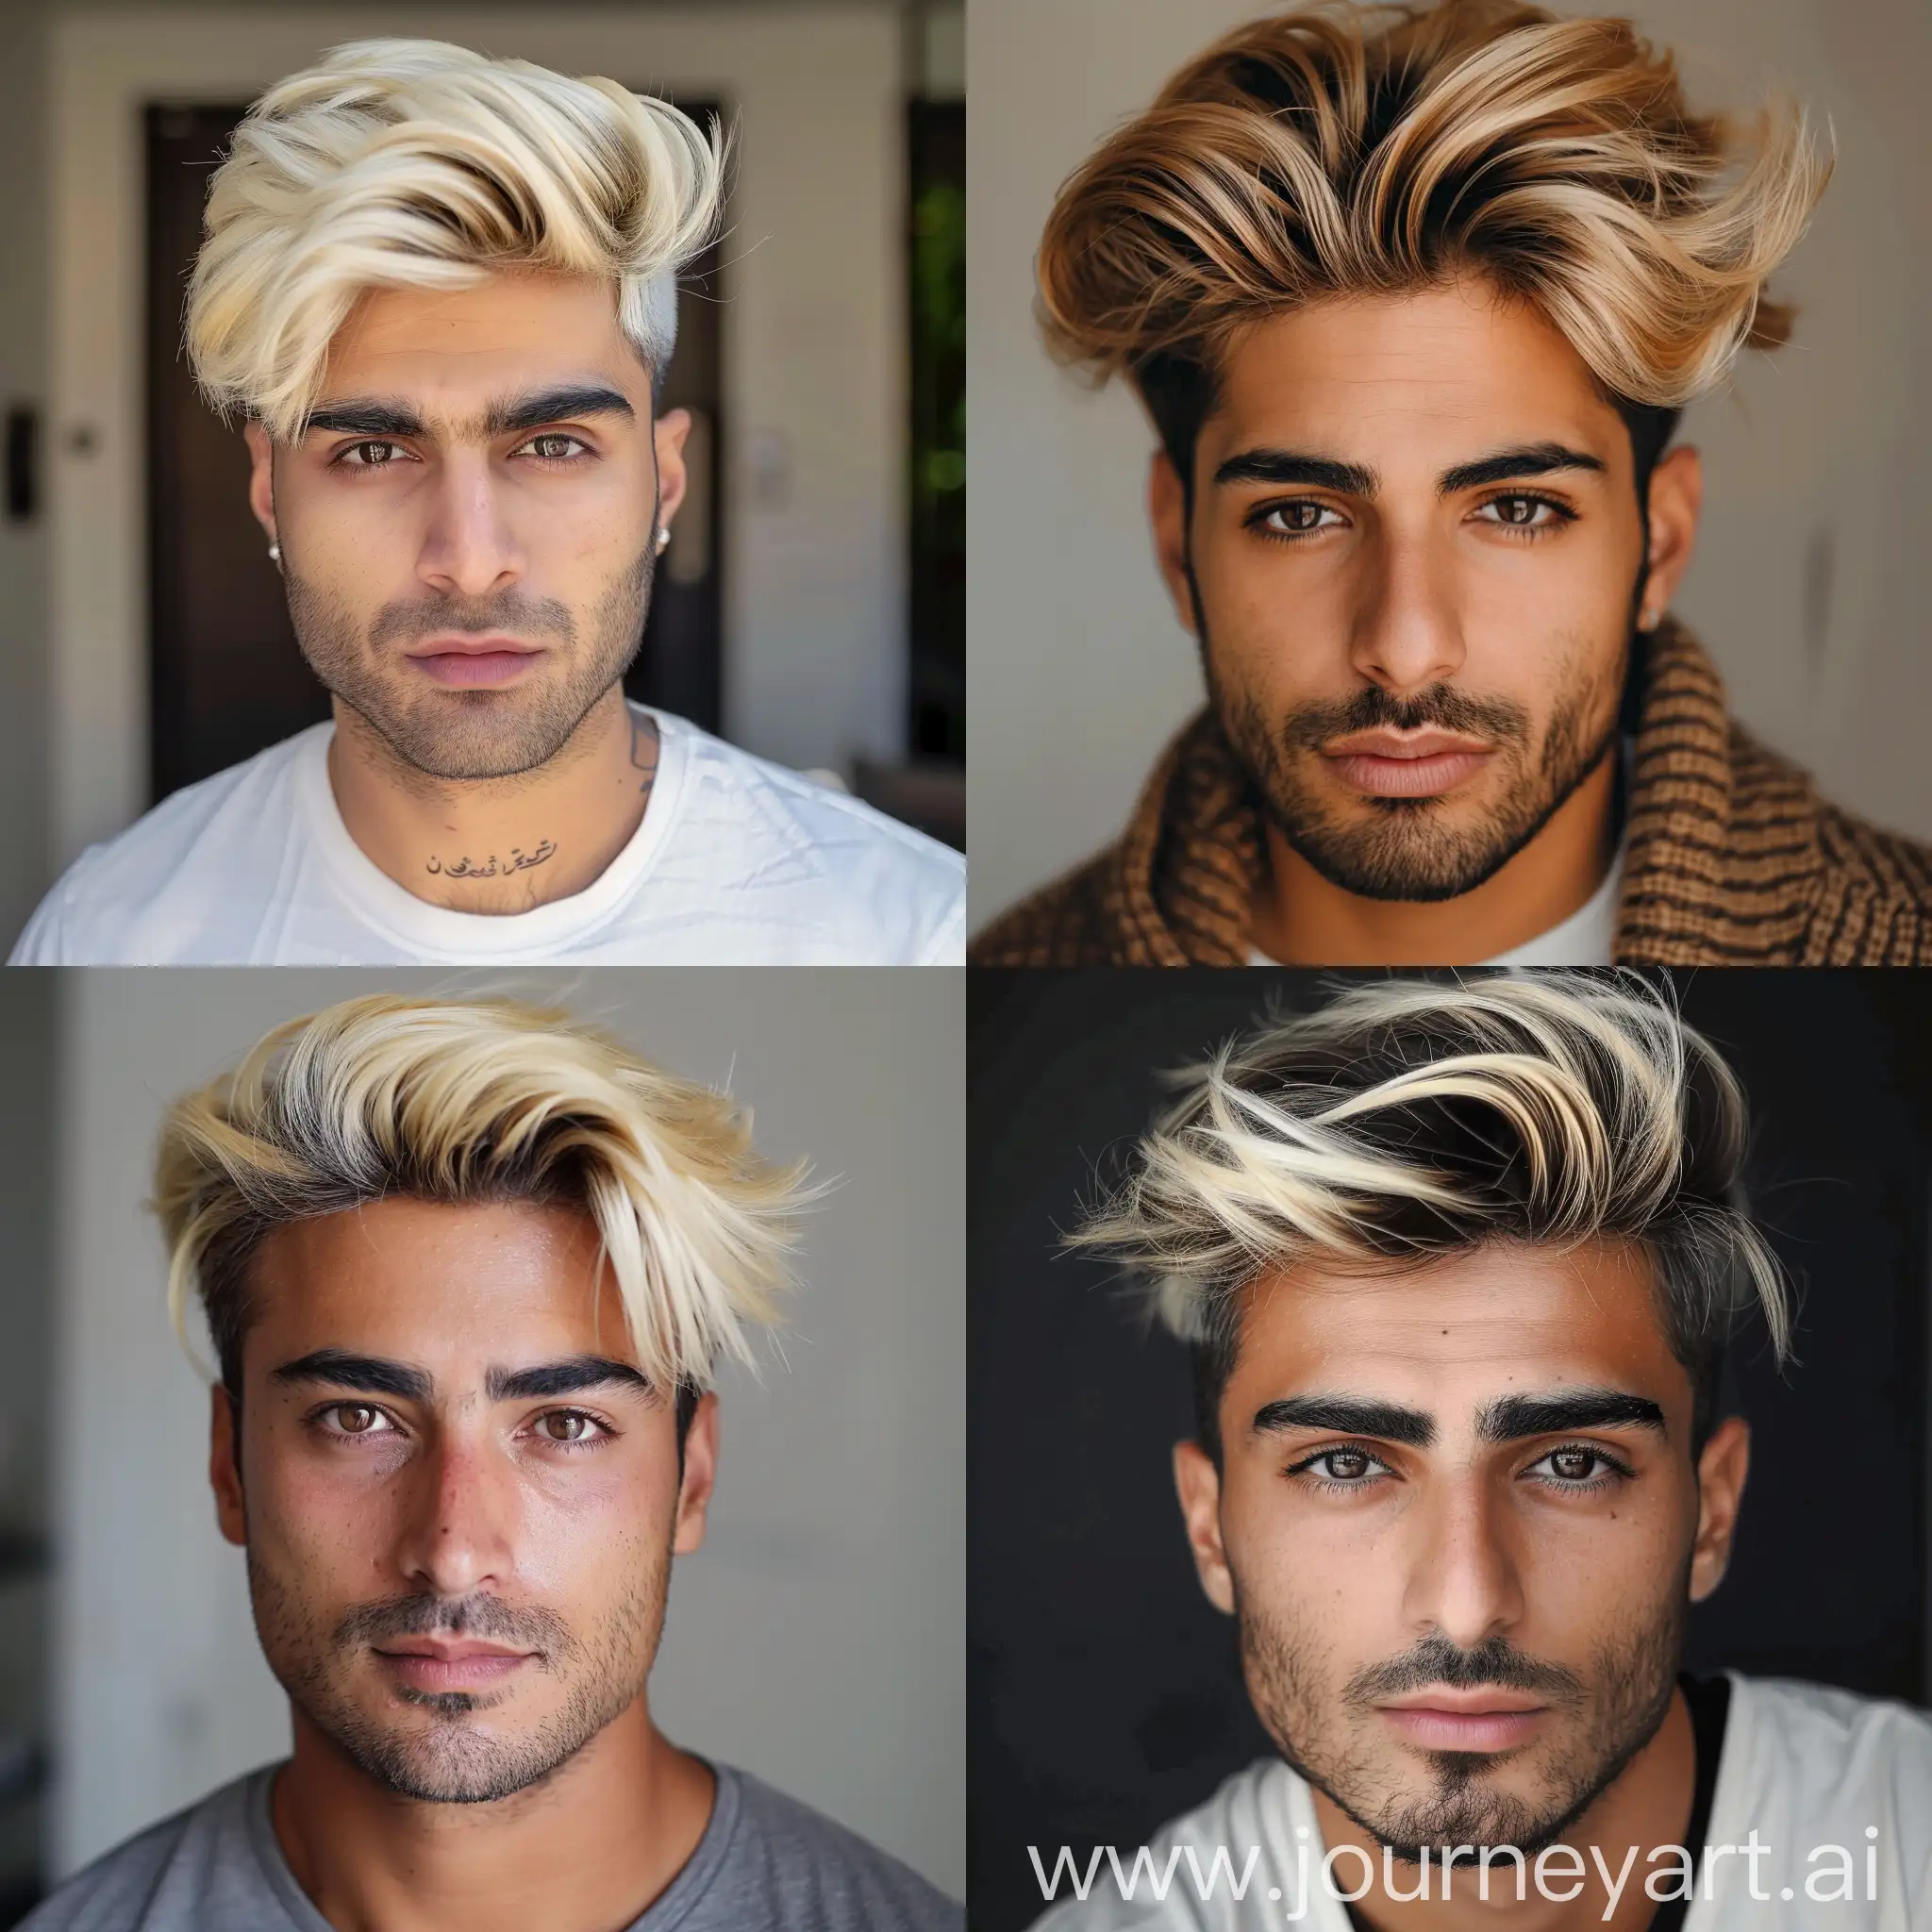 Iranian man with blonde hair